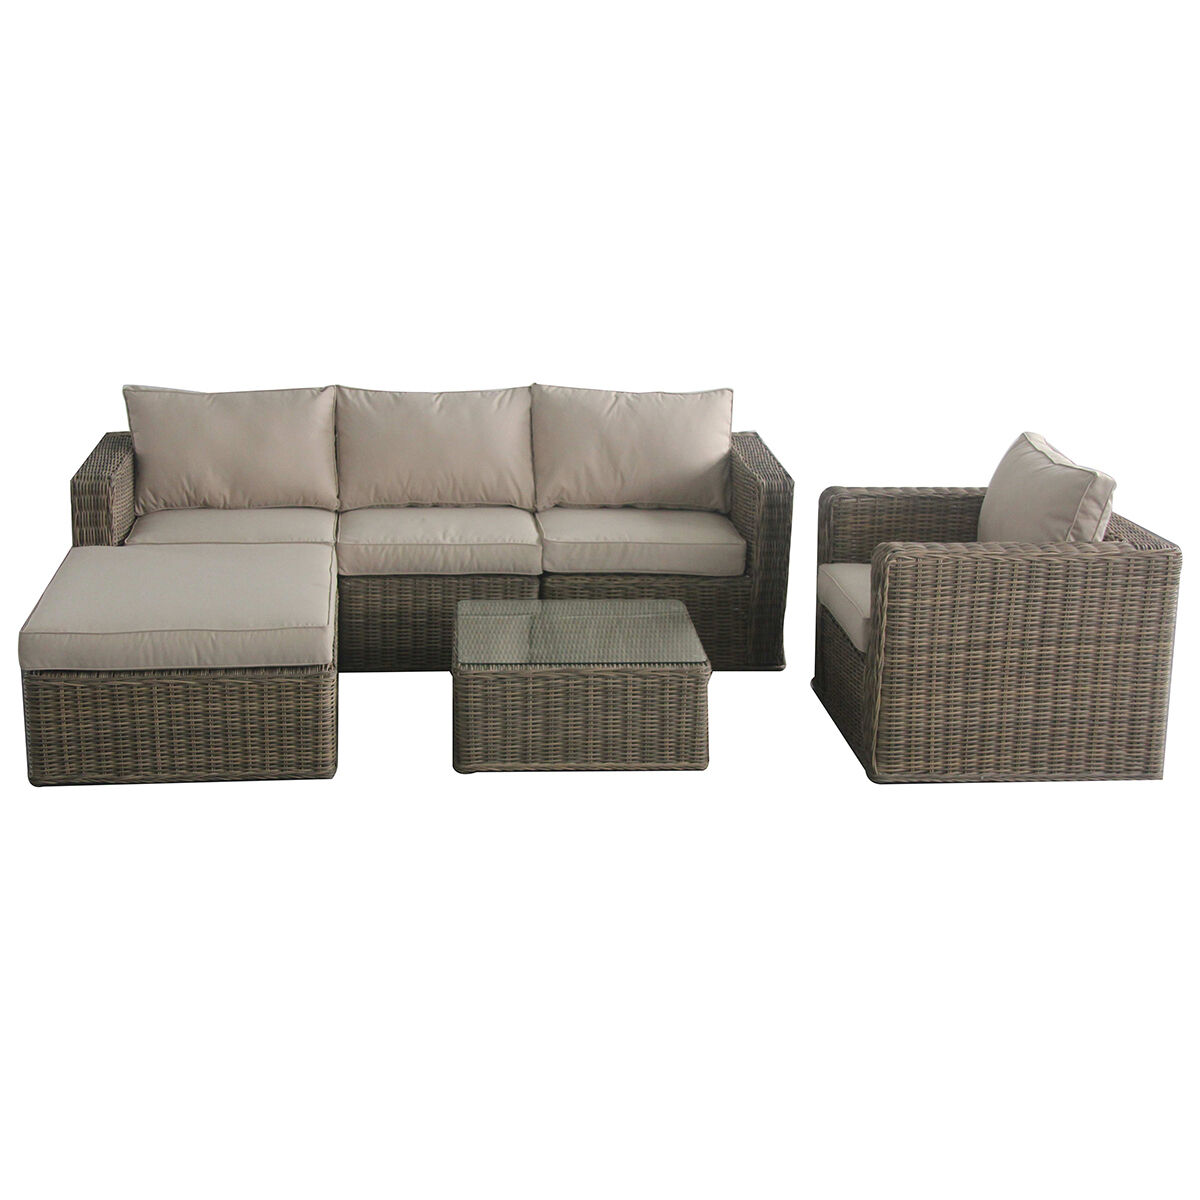 Maze - Winchester Chaise Rattan Corner Sofa Group with Armchair product image